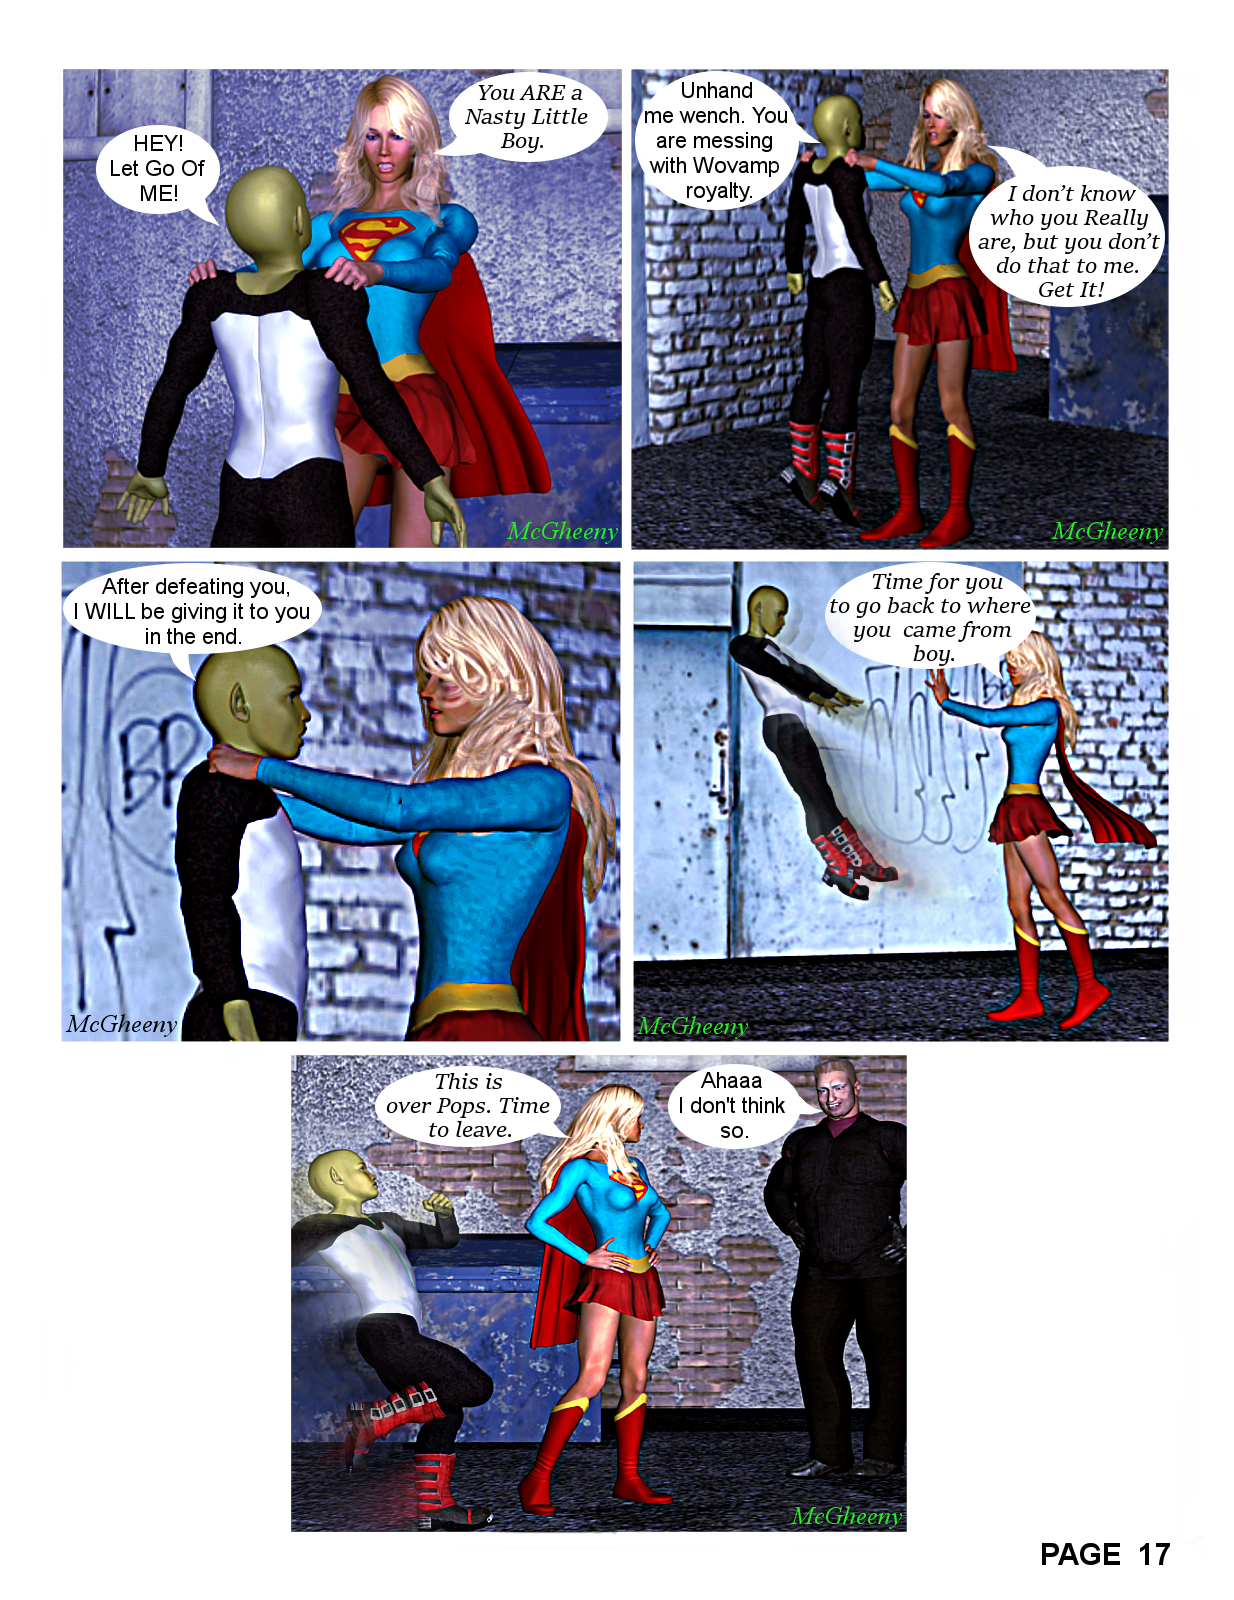 Supergirl in Banors Prize Page 17.png